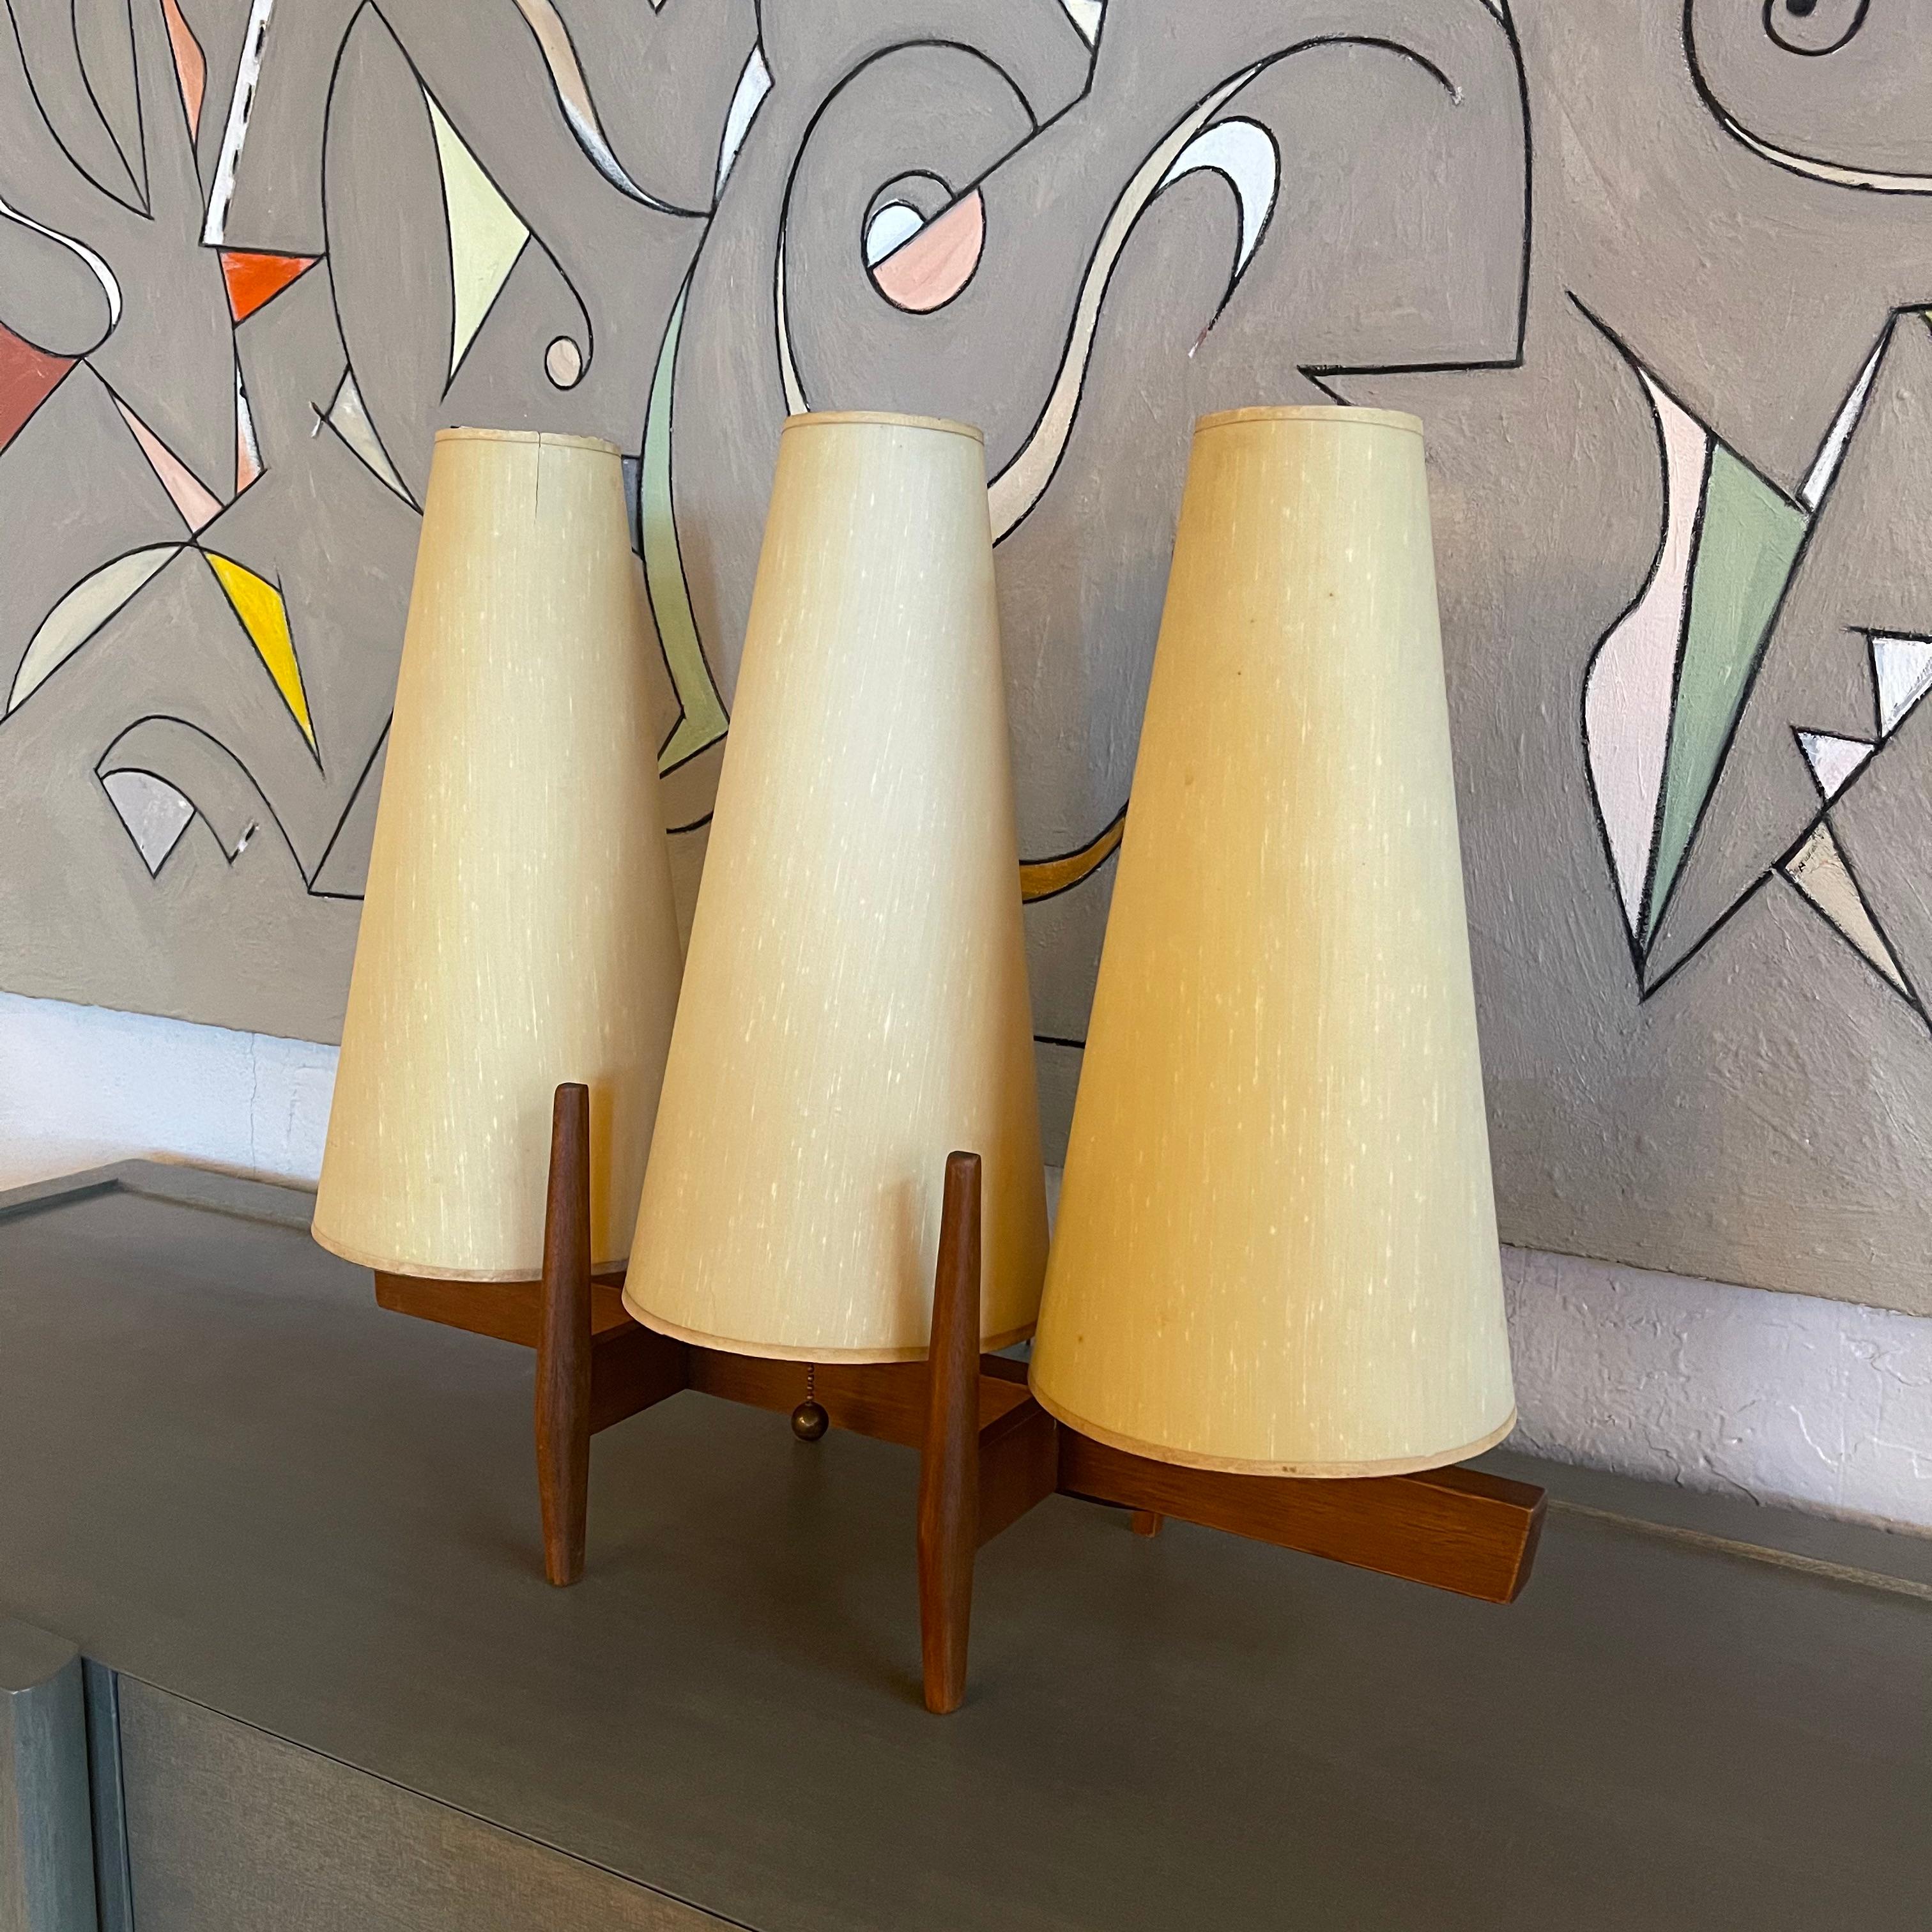 American Mid-Century Modern Three Shade Table Lamp by John Keal For Modeline